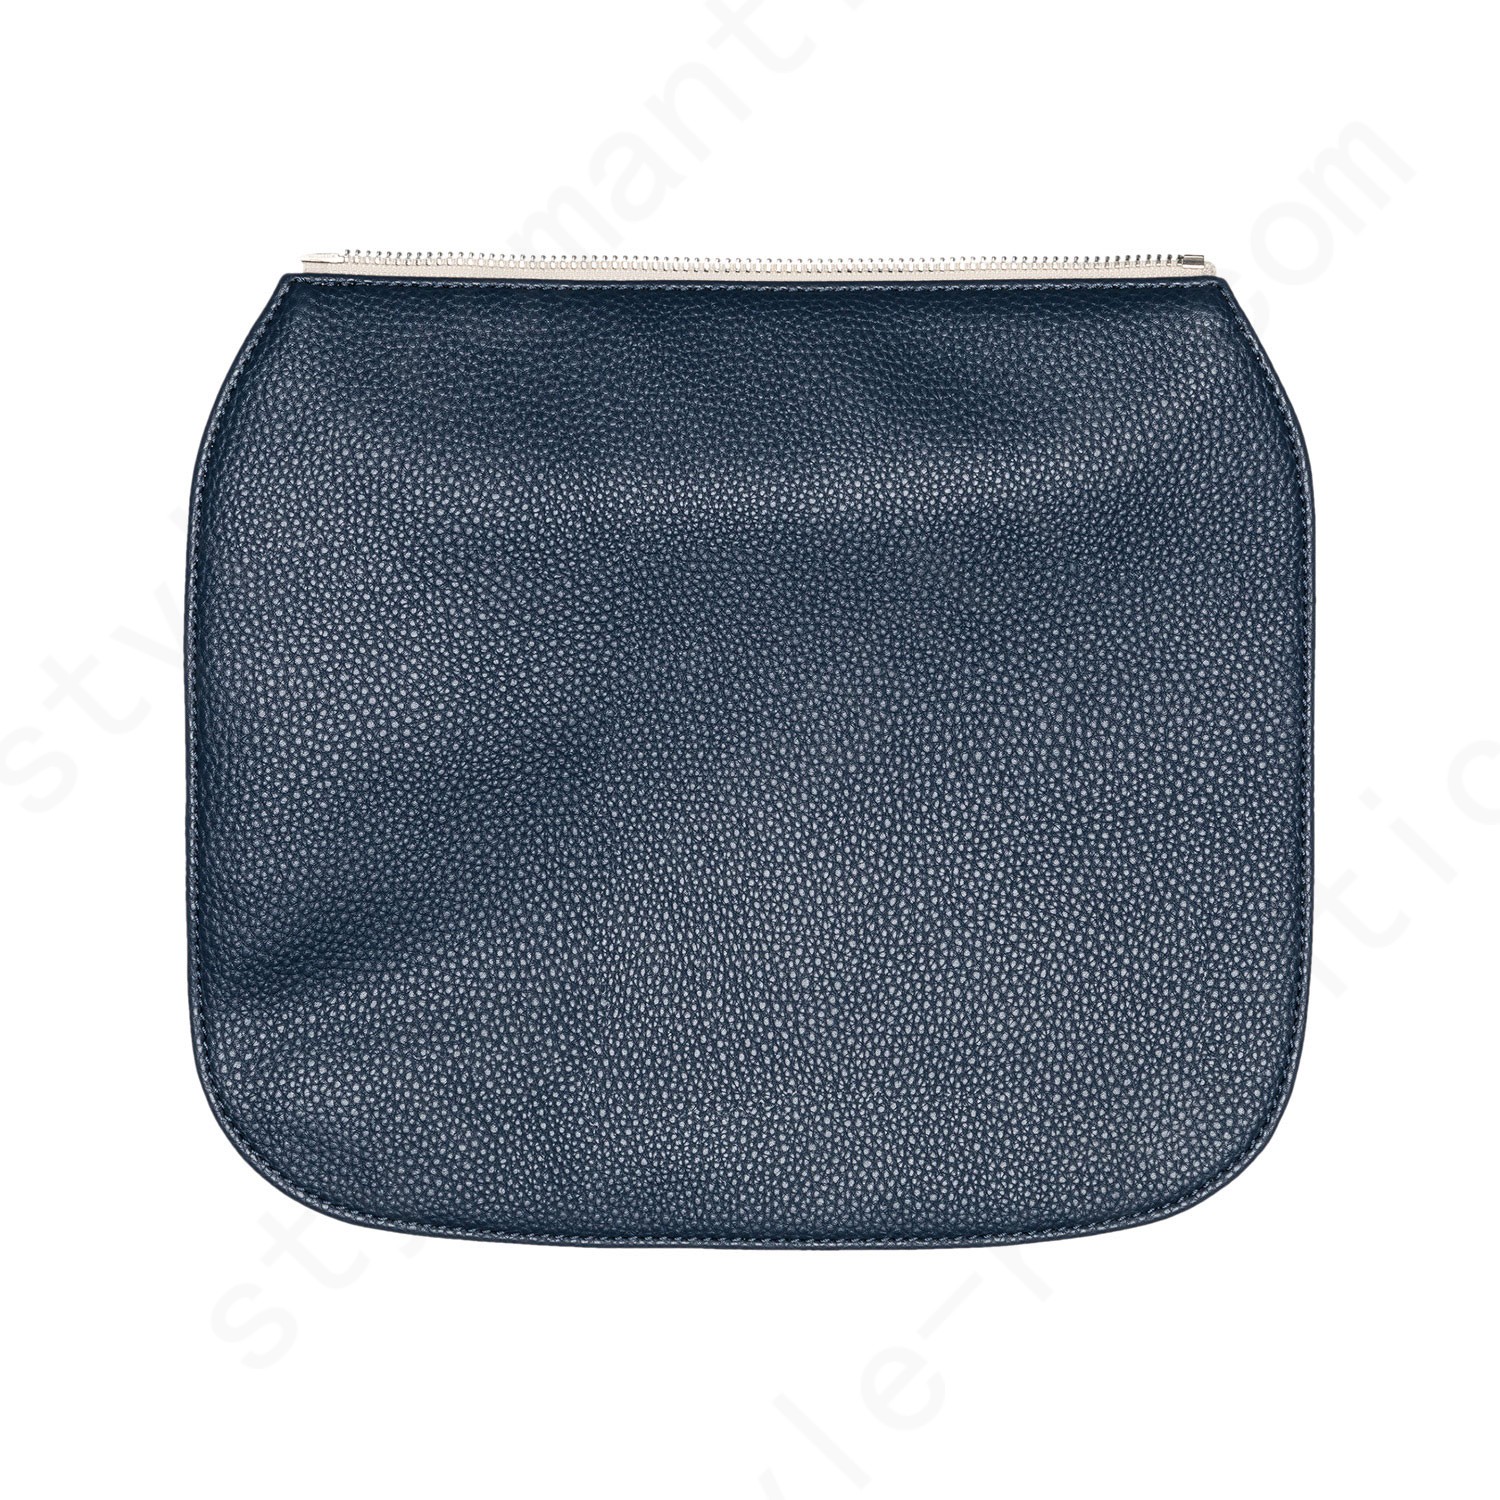 Thirty-One Gifts Studio Thirty-One Flap - Midnight Navy Pebble Bags Accessories - Thirty-One Gifts Studio Thirty-One Flap - Midnight Navy Pebble Bags Accessories